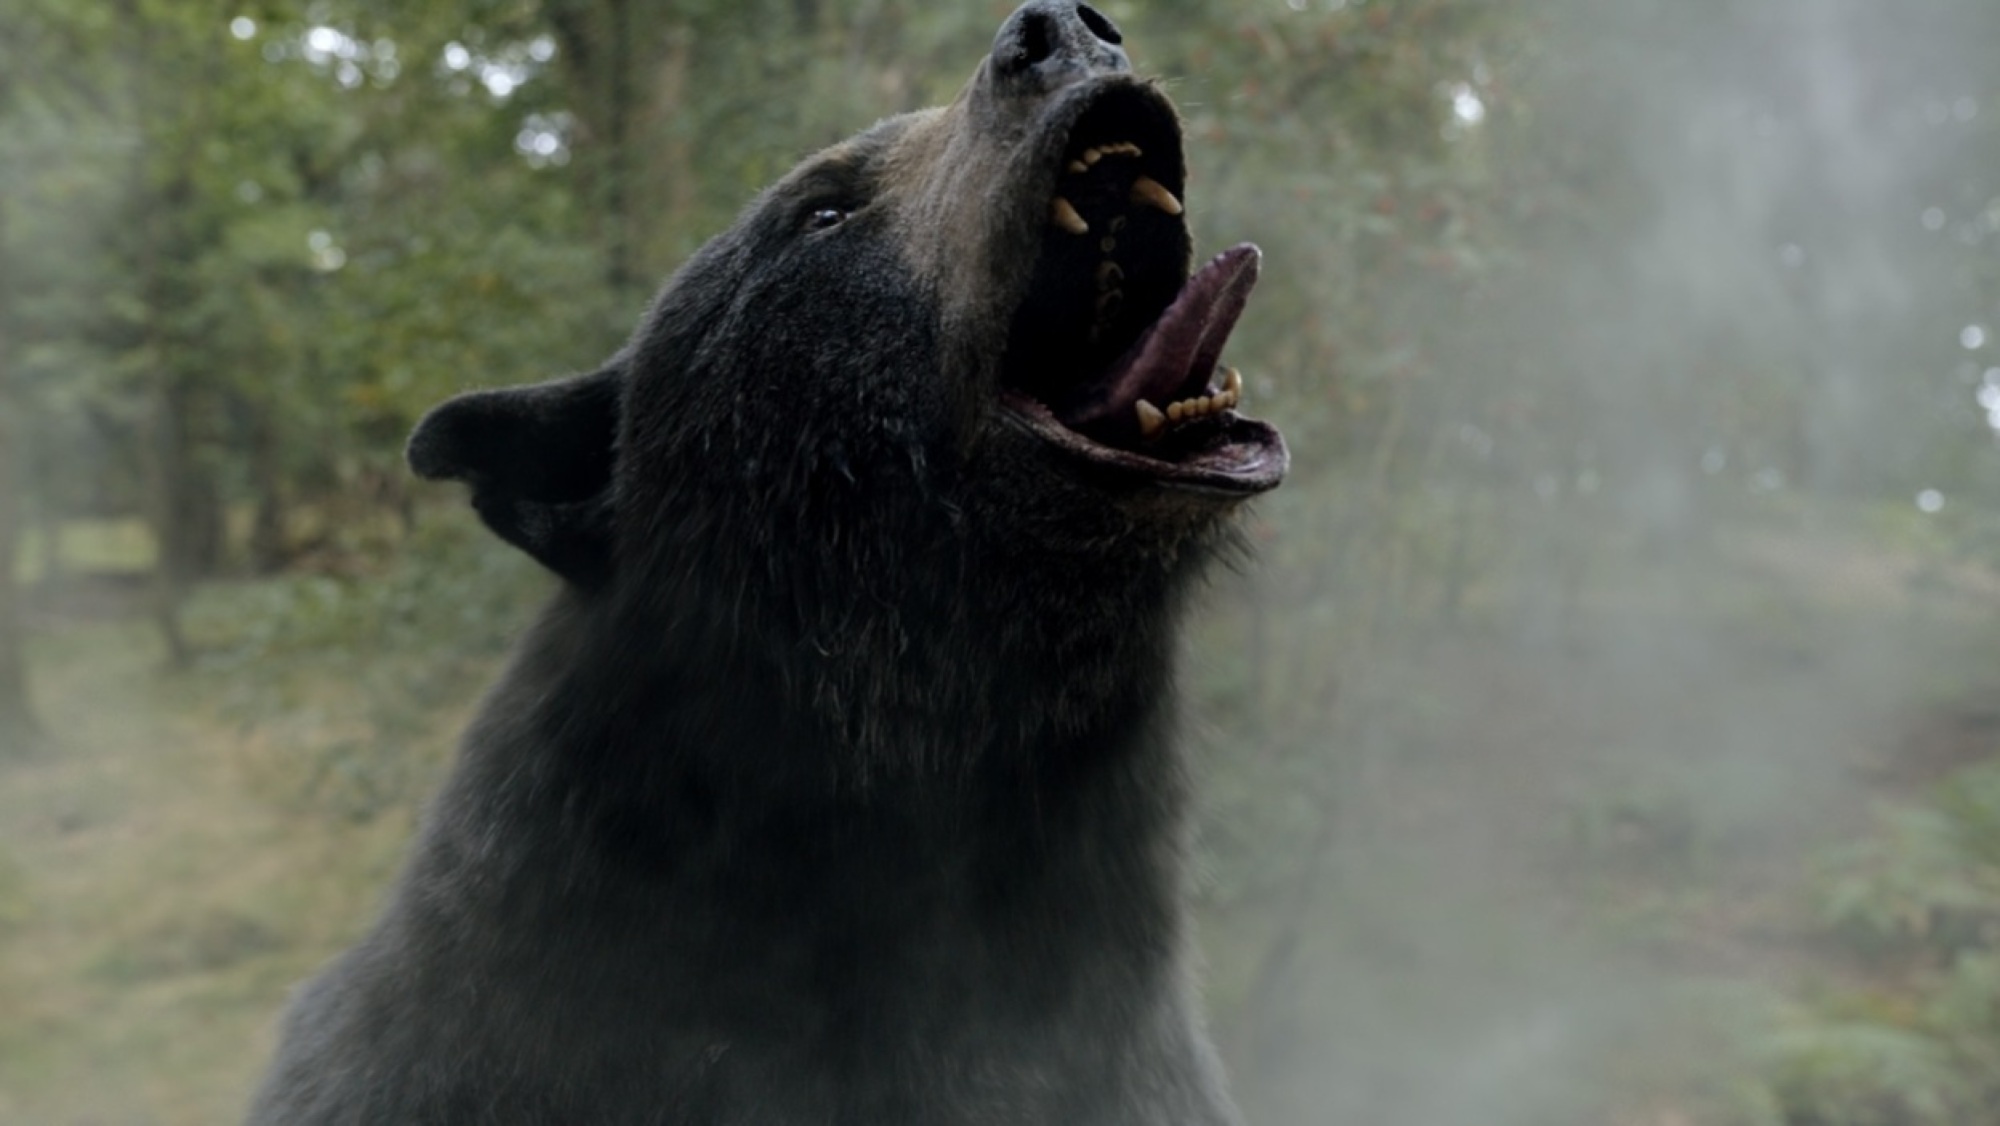 A bear stretches out its neck and opens its mouth amid a mist of white dust.